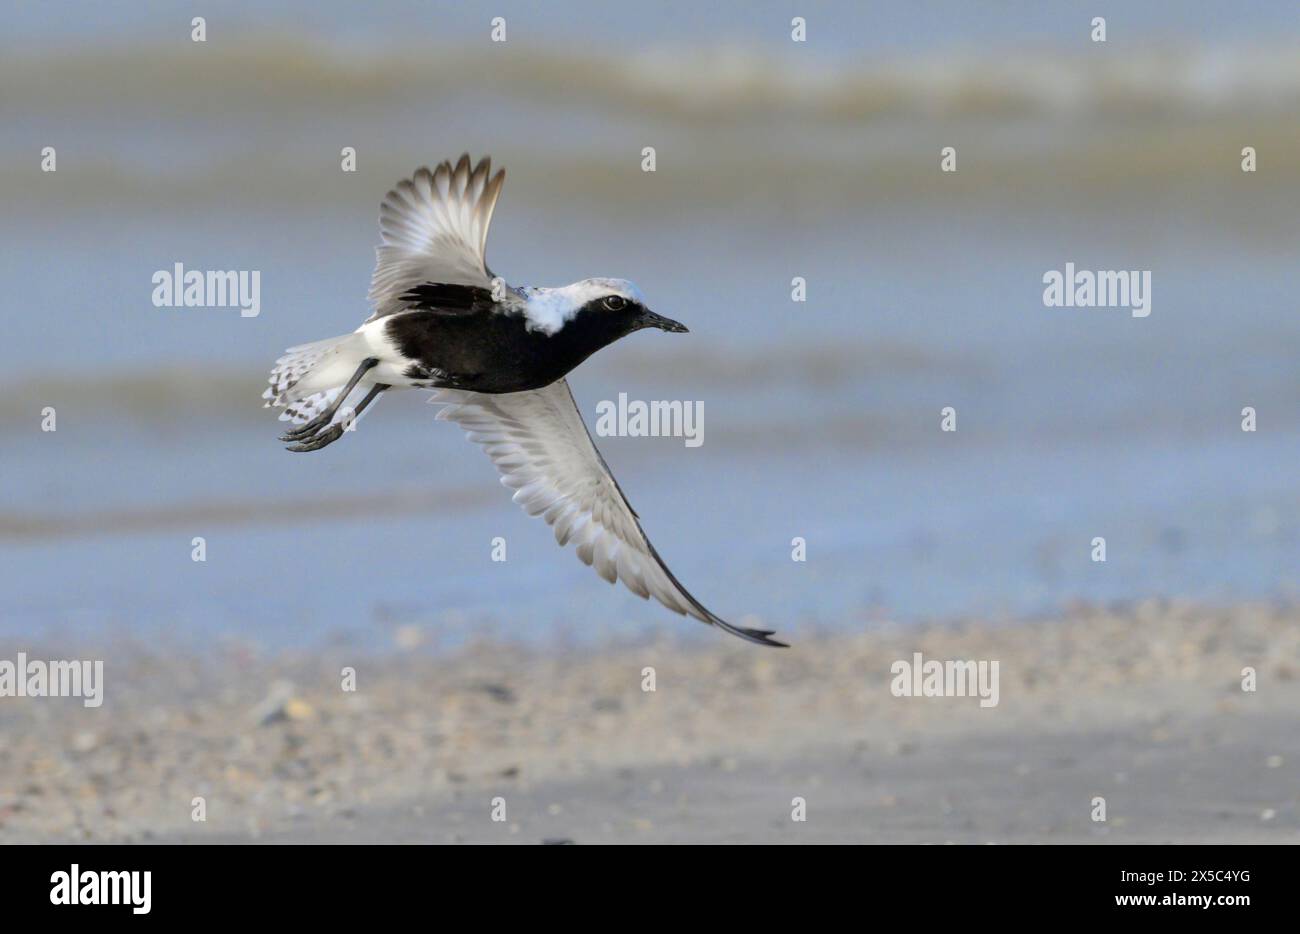 Black-bellied plover (Pluvialis squatarola) taking off from sandy beach during the spring migration, Galveston, Texas, USA. Stock Photo